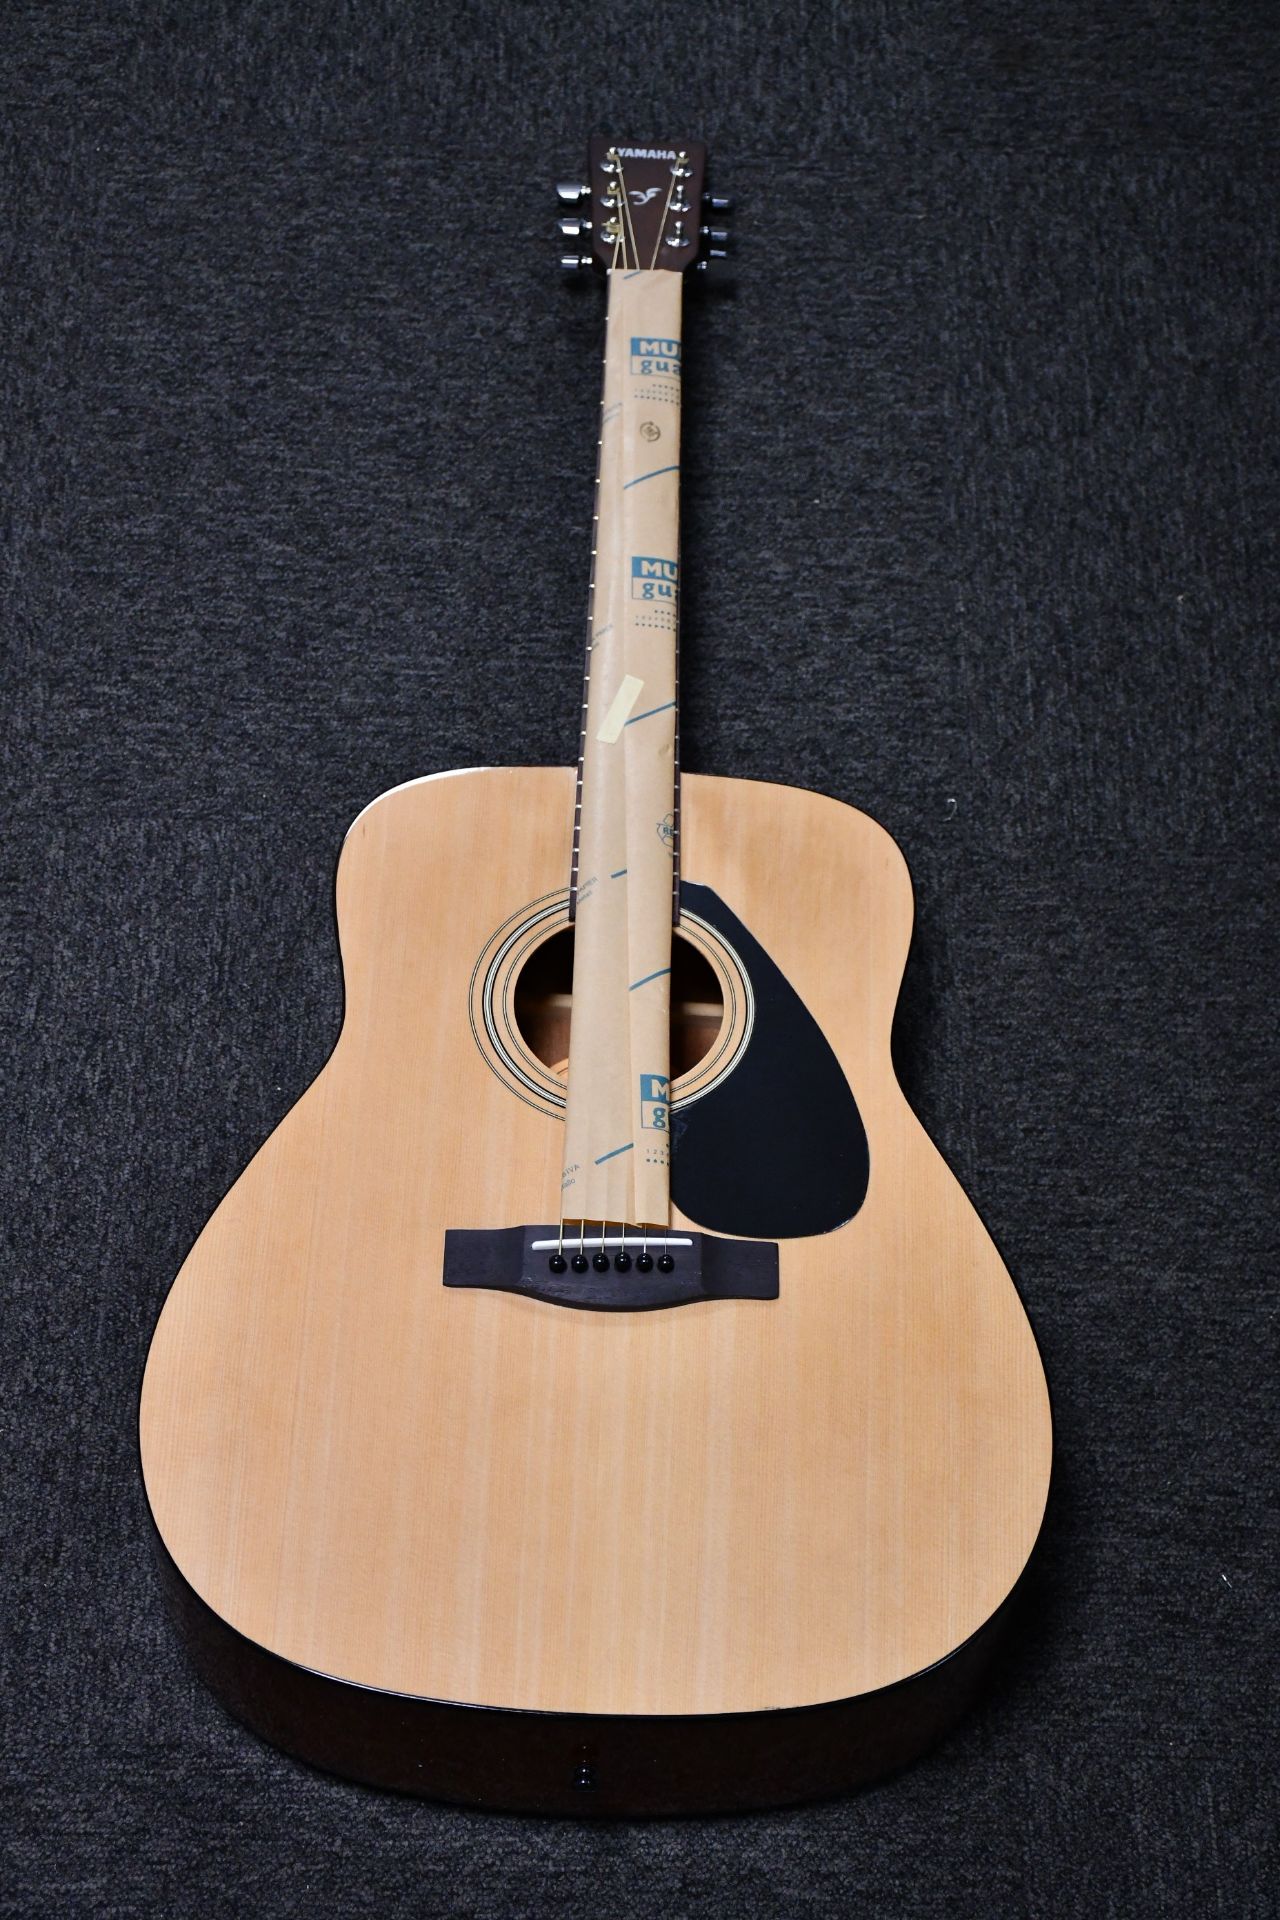 A boxed as new Yamaha F310 acoustic guitar.